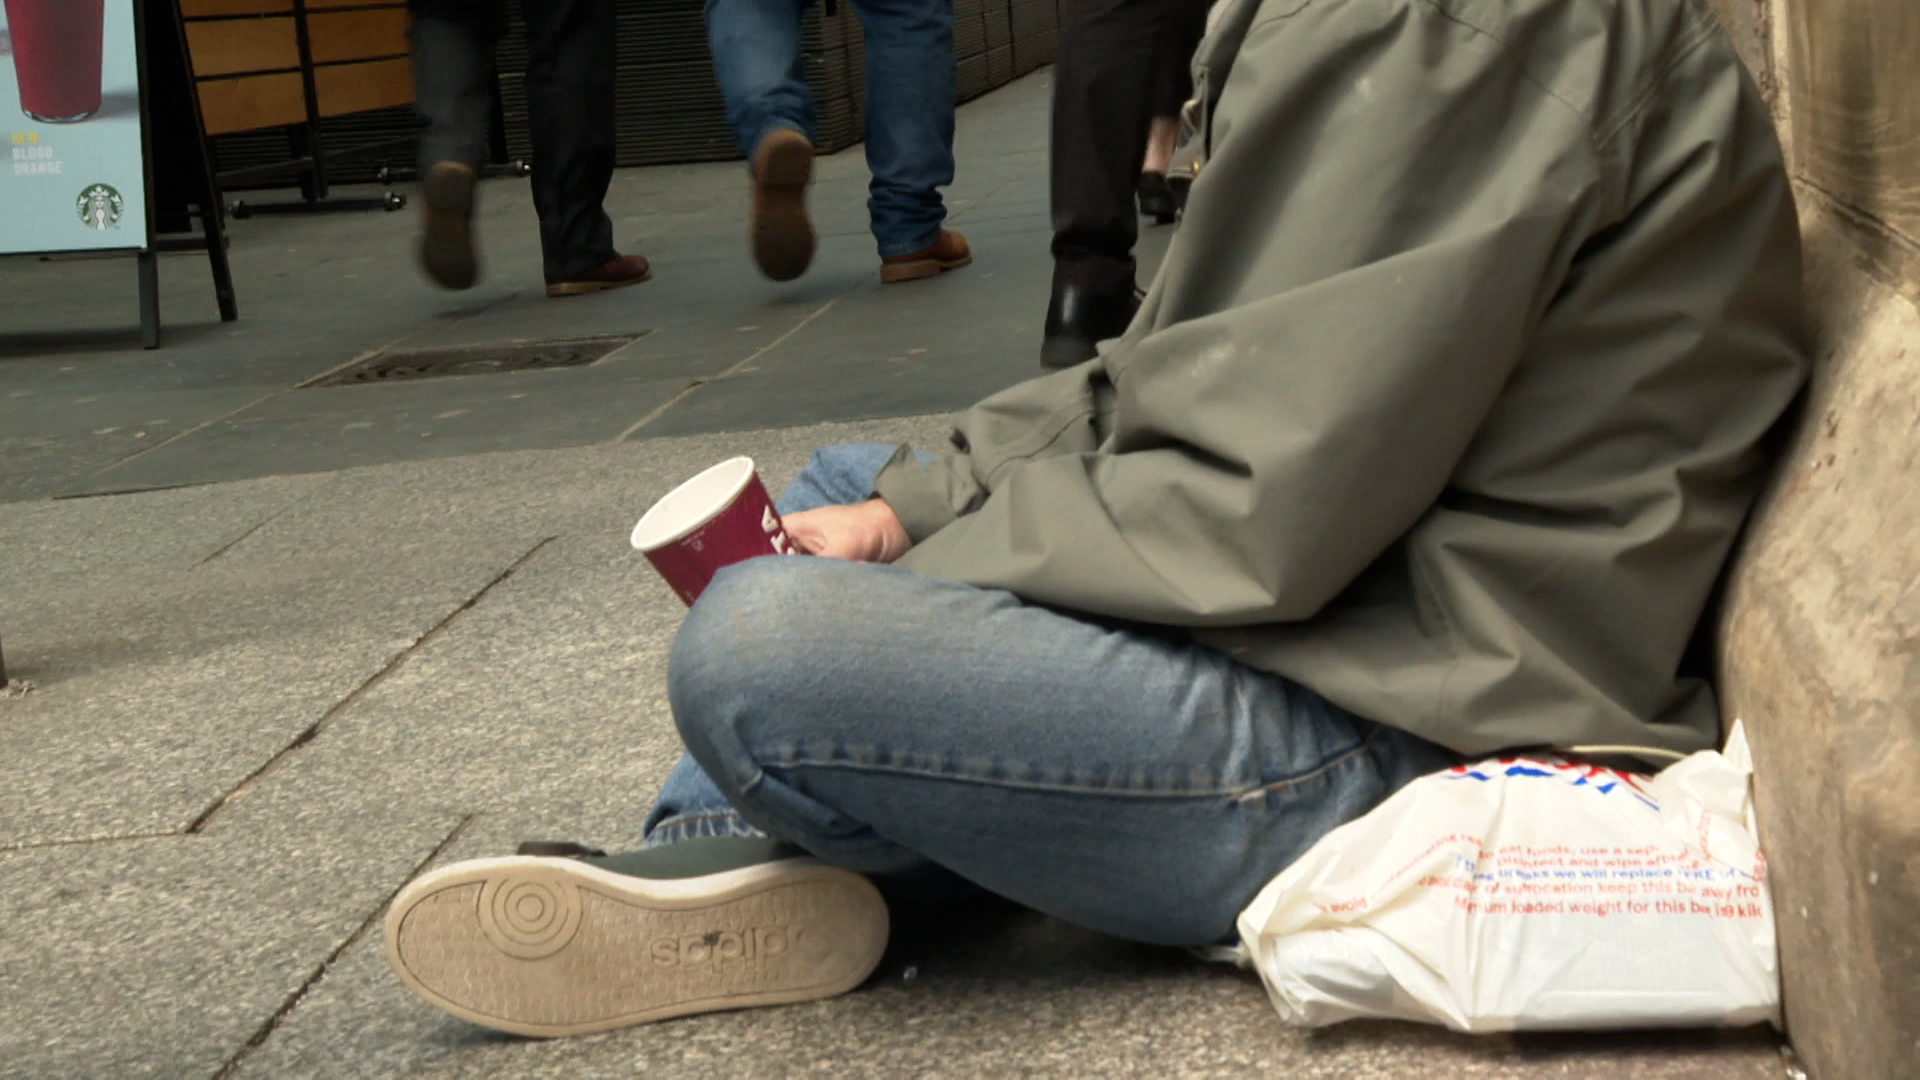 Crisis has issued a warning over the impact the issue could have on homeless numbers in Scotland.